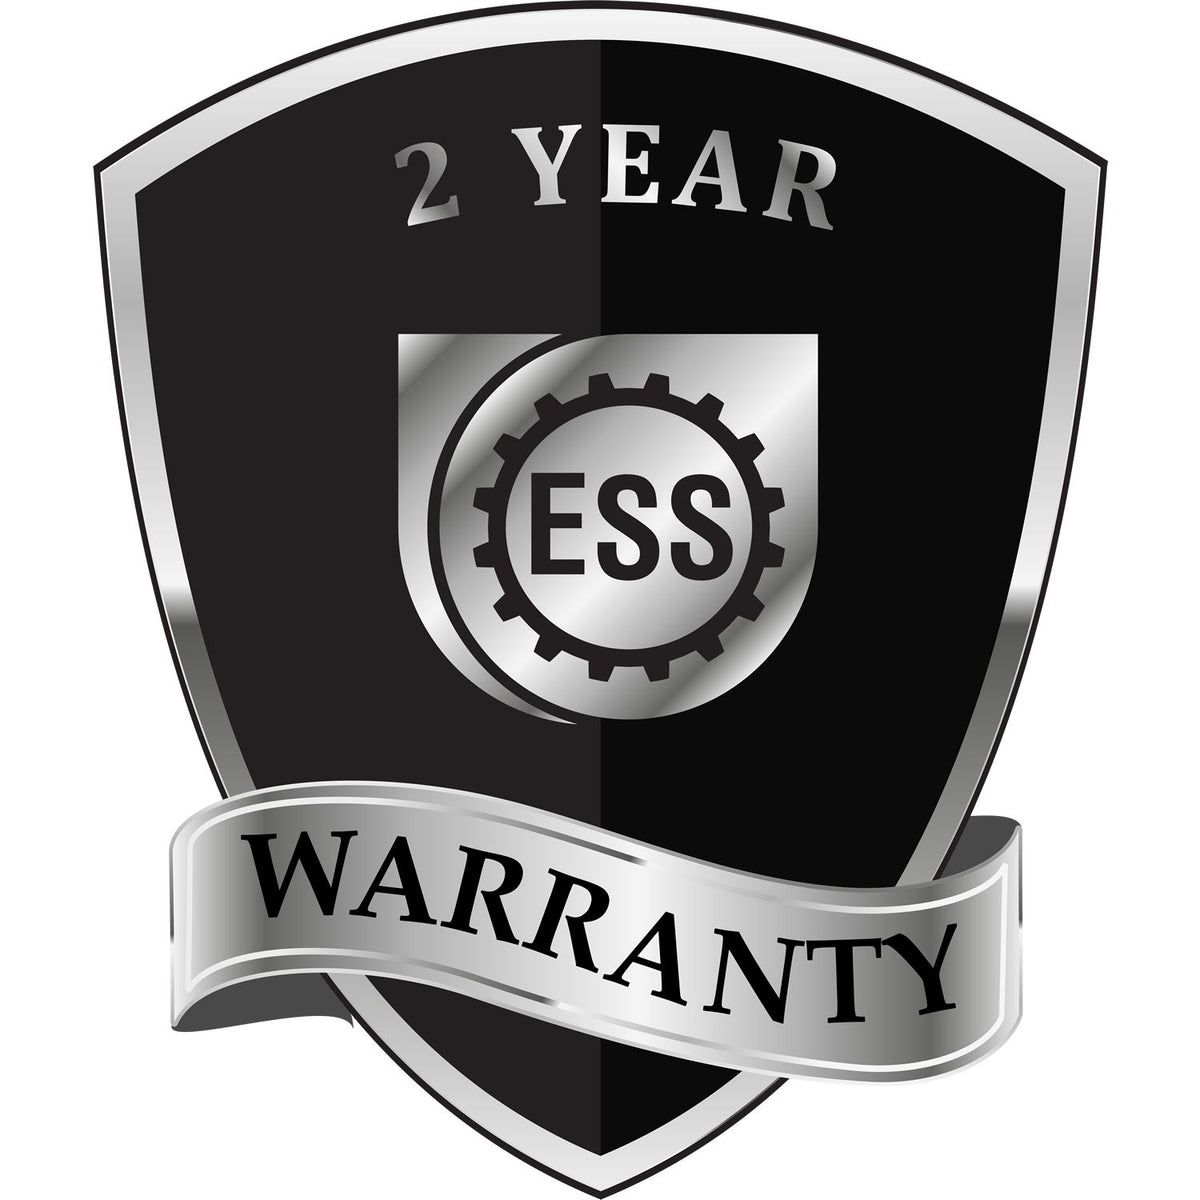 A badge or emblem showing a warranty icon for the Heavy Duty Cast Iron Pennsylvania Architect Embosser